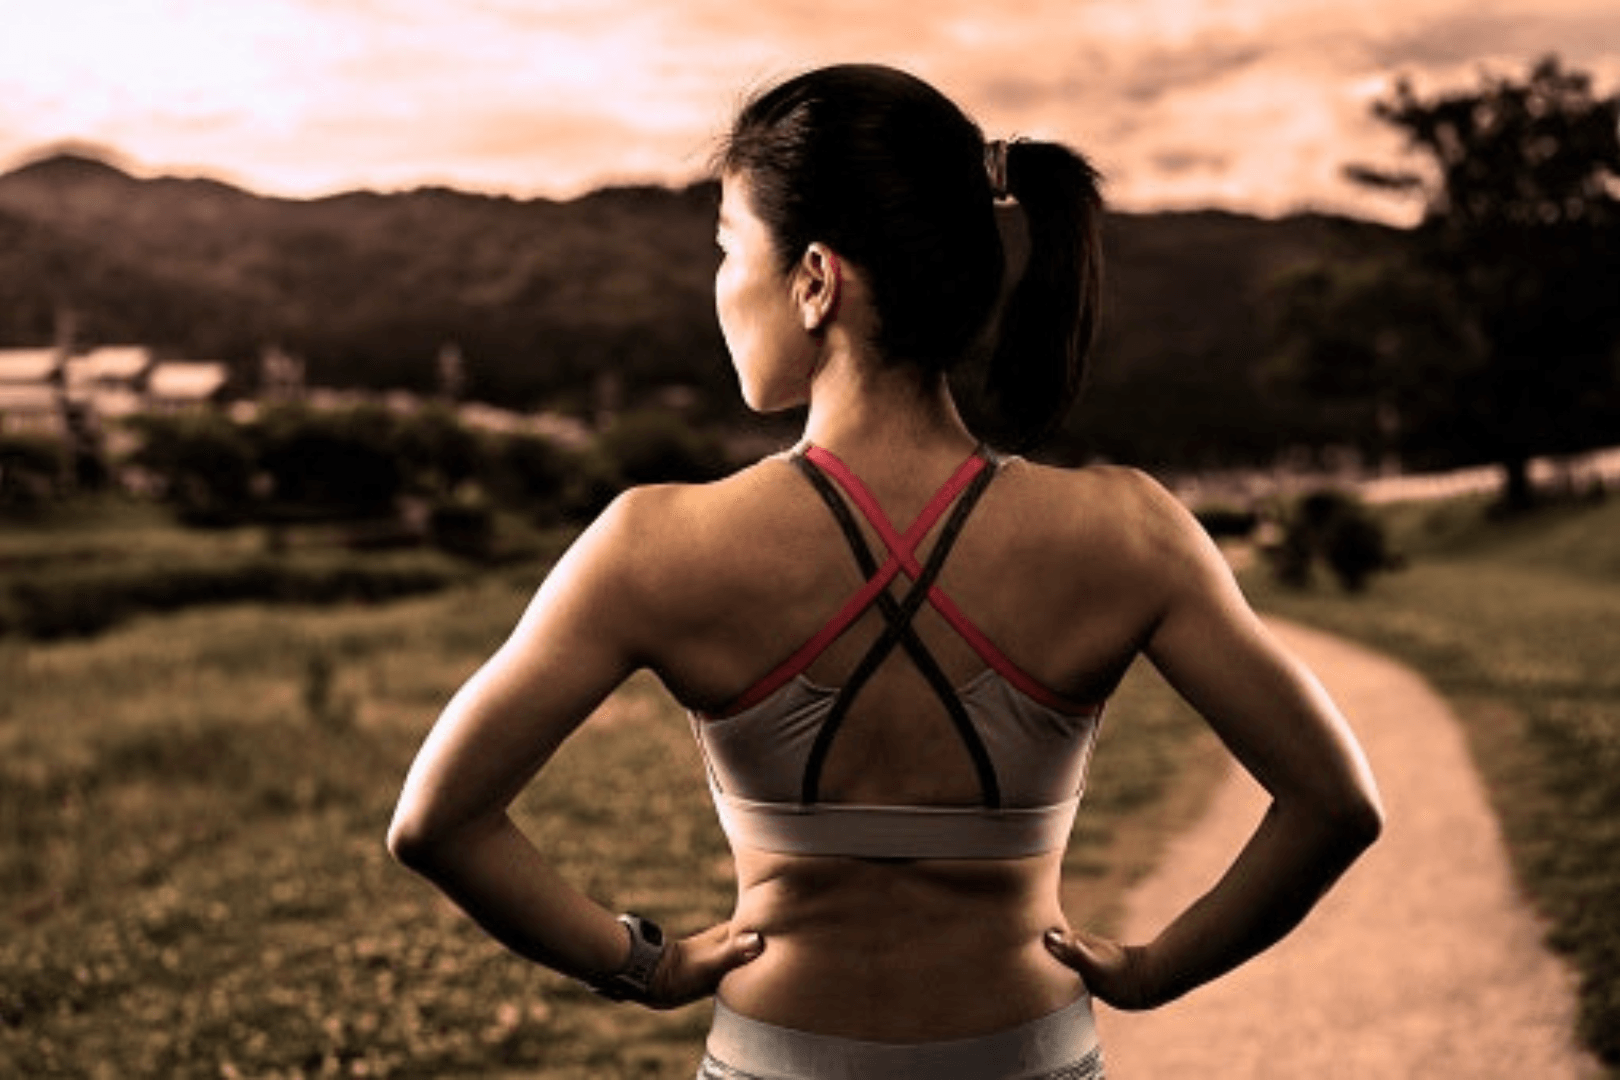 Full-Coverage Under Armour Sports Bras For HIIT Training